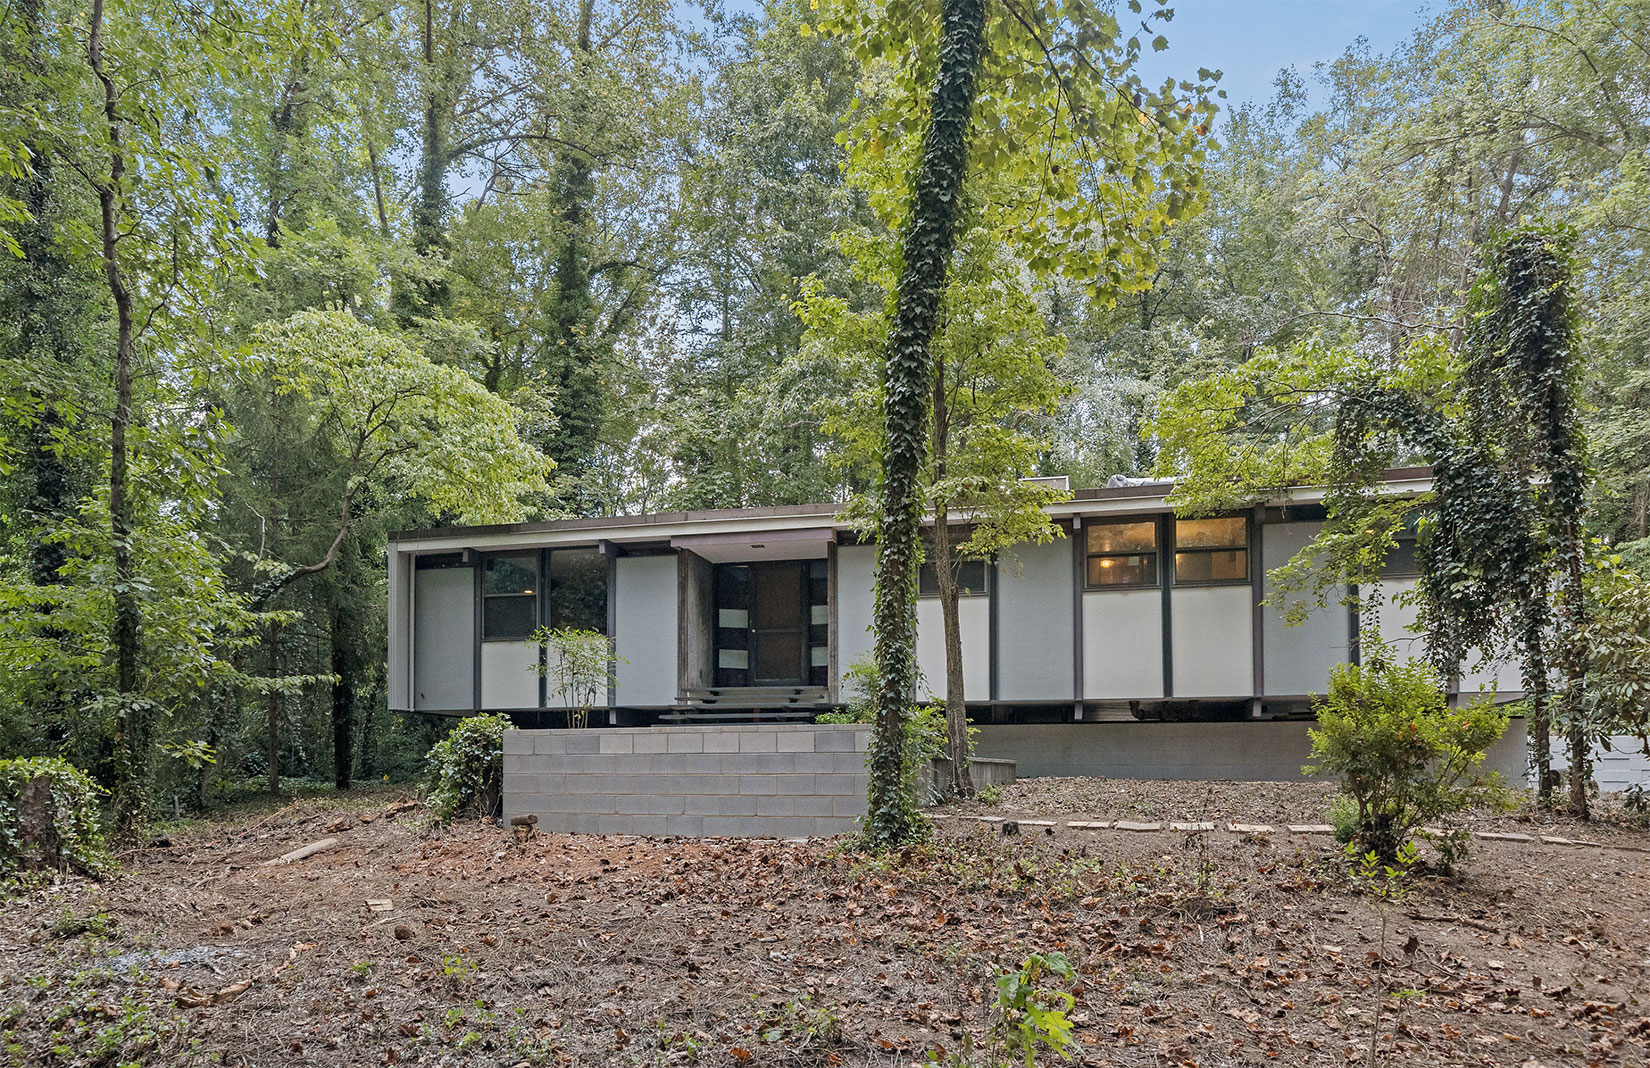 An architect’s midcentury home lists in the foothills of the Appalachian Mountains